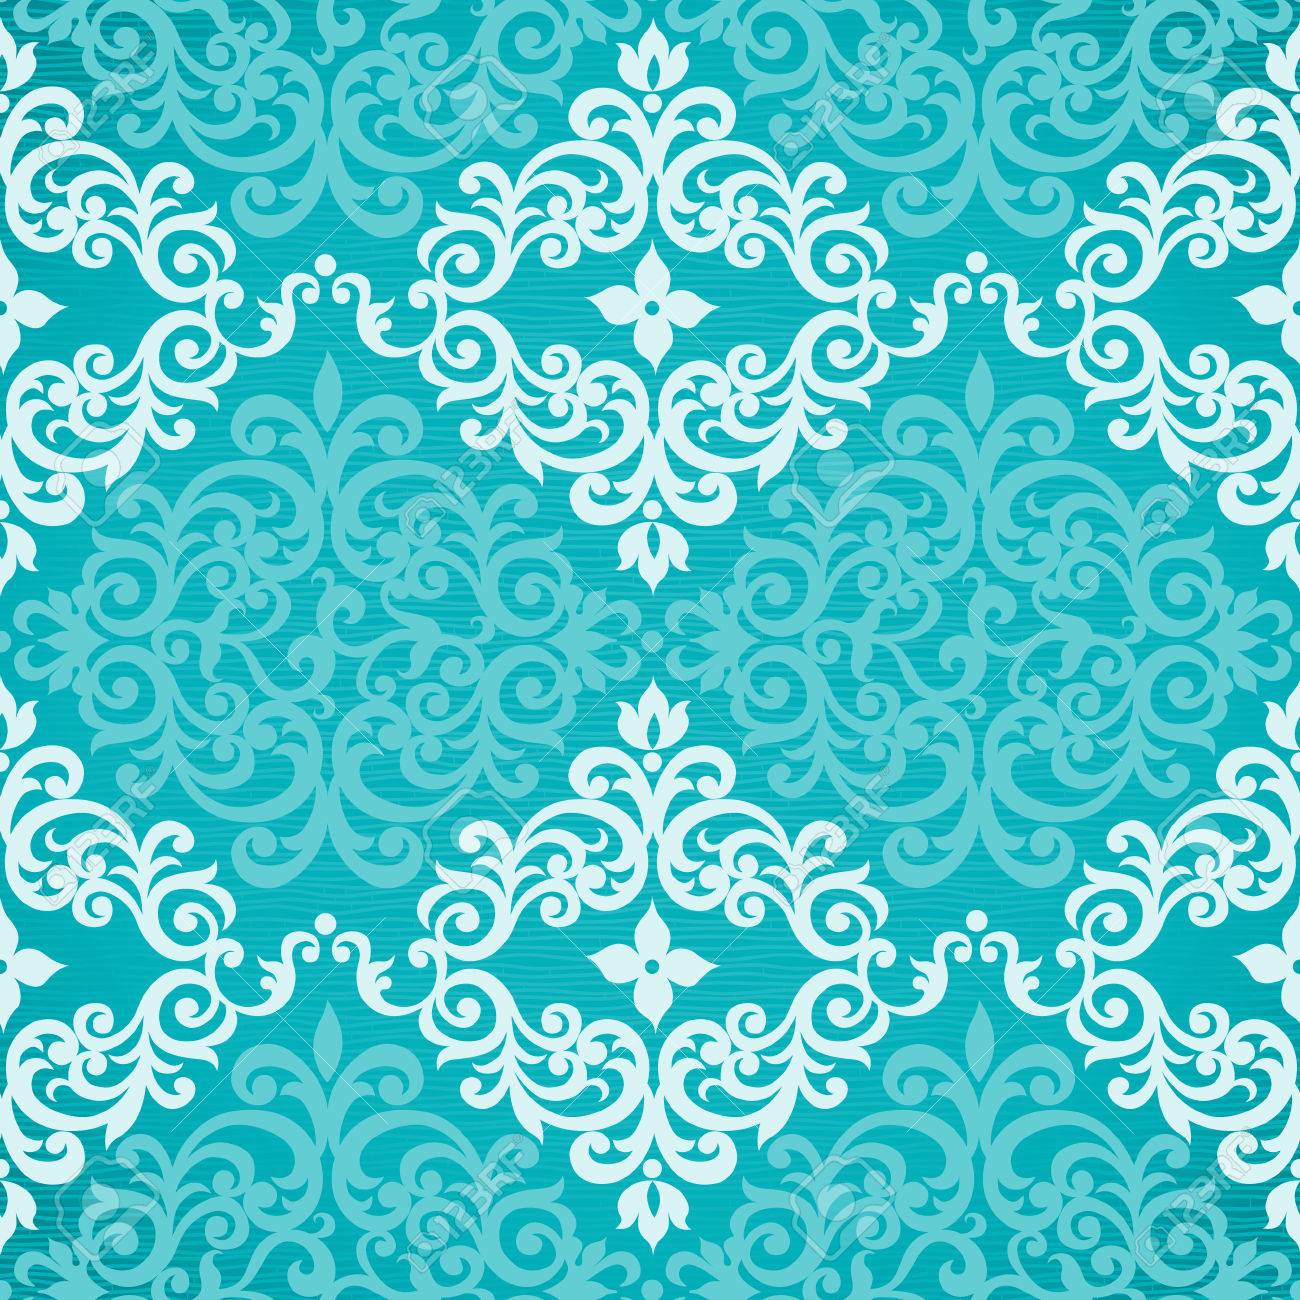 Vector Seamless Pattern With Swirls And Floral Motifs In Retro